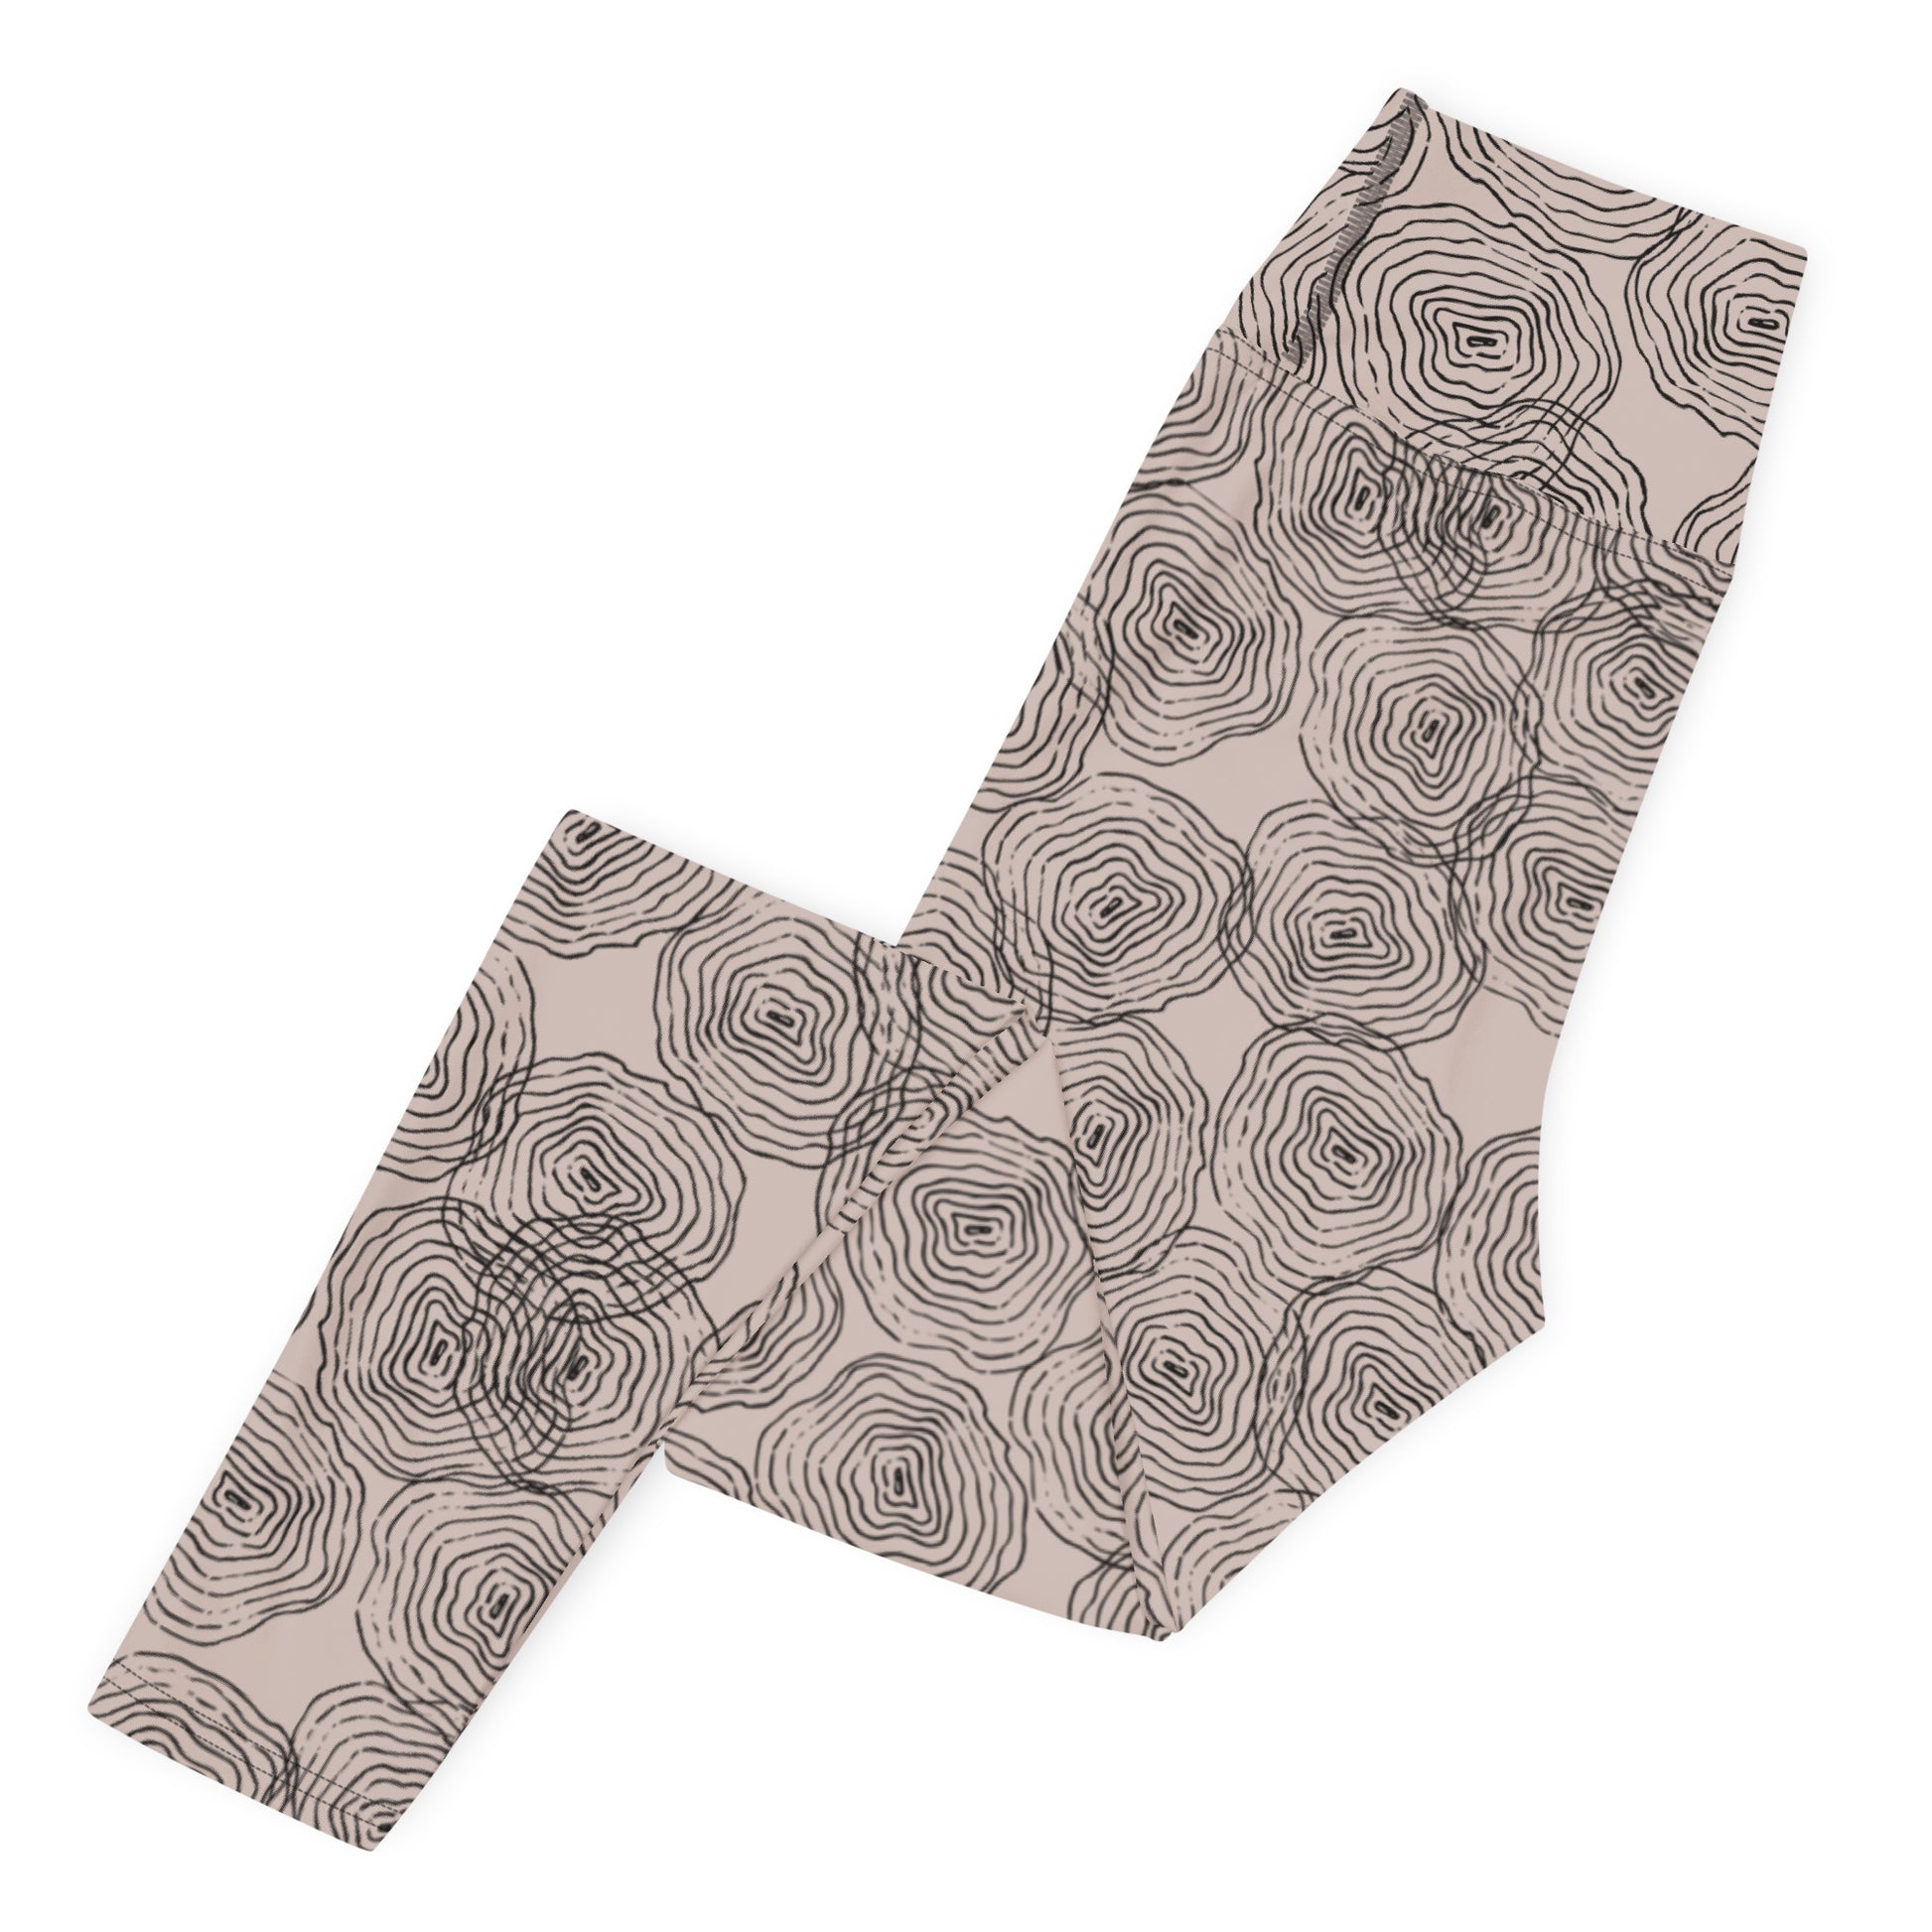 Ripple in Gray High Waisted Leggings - Solshine and Co